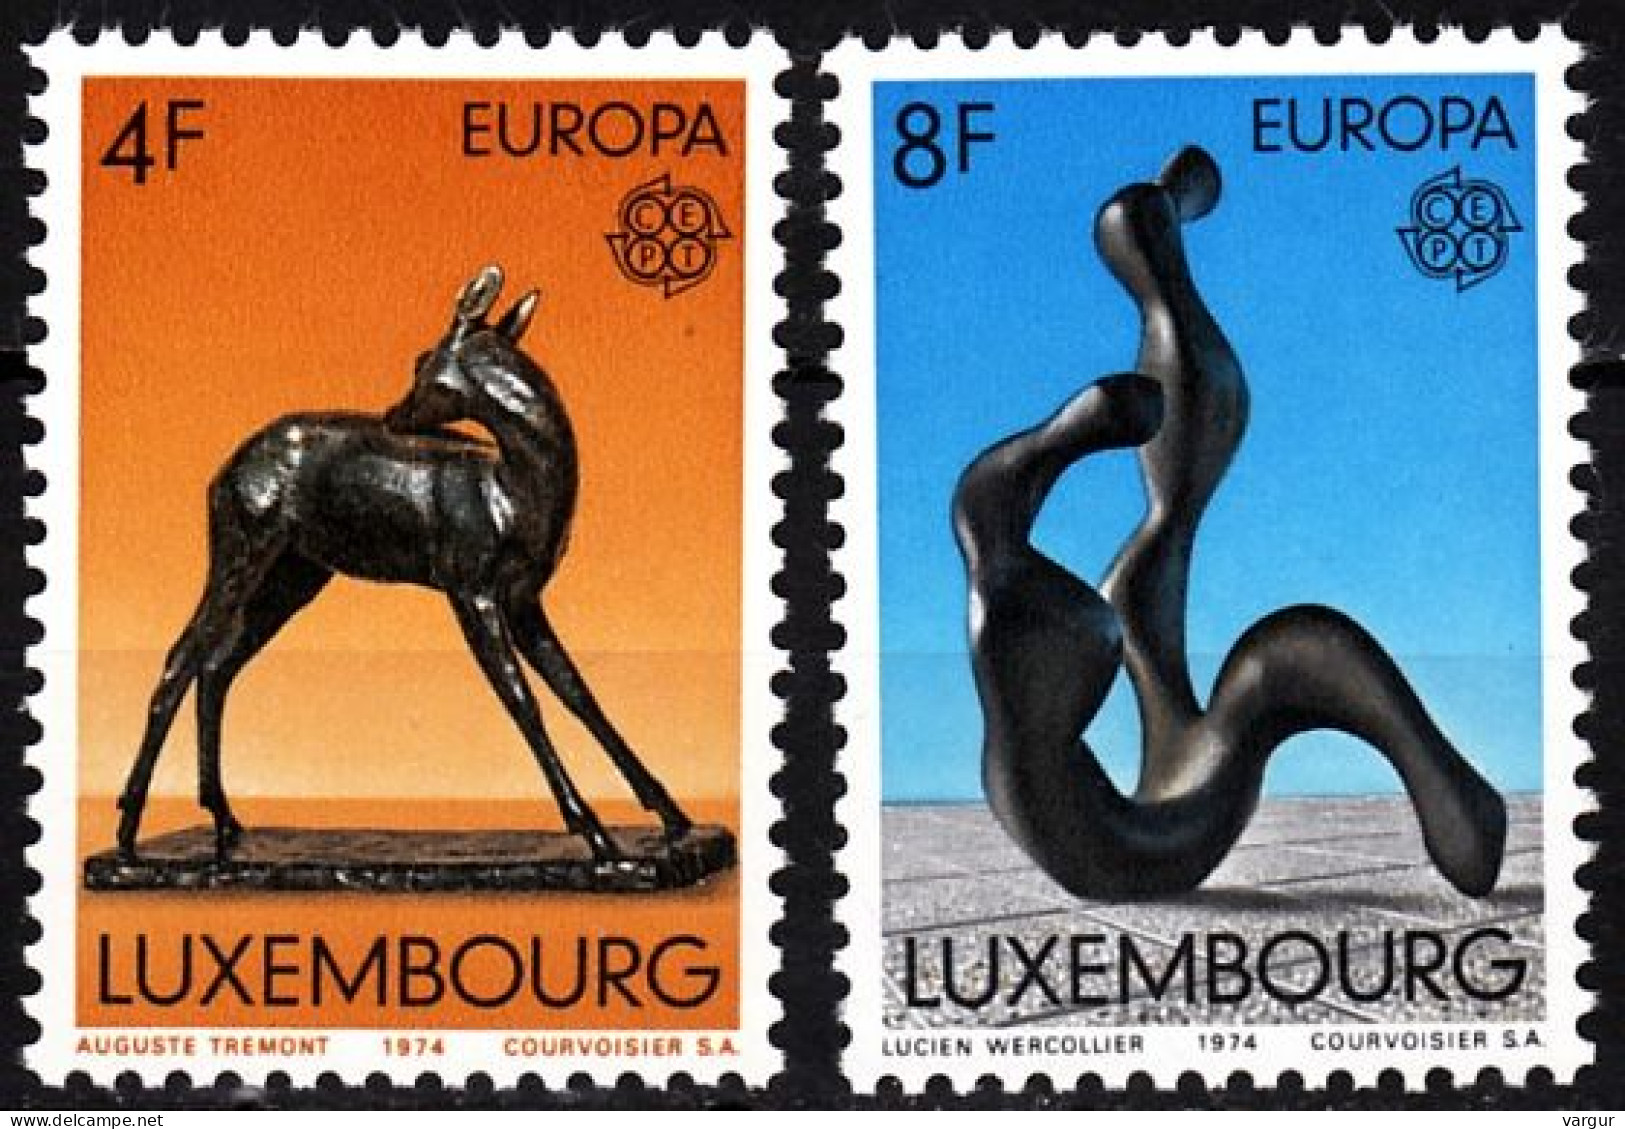 LUXEMBOURG / LUXEMBURG 1974 EUROPA: Sculpture. Complete Set, MNH - 1974